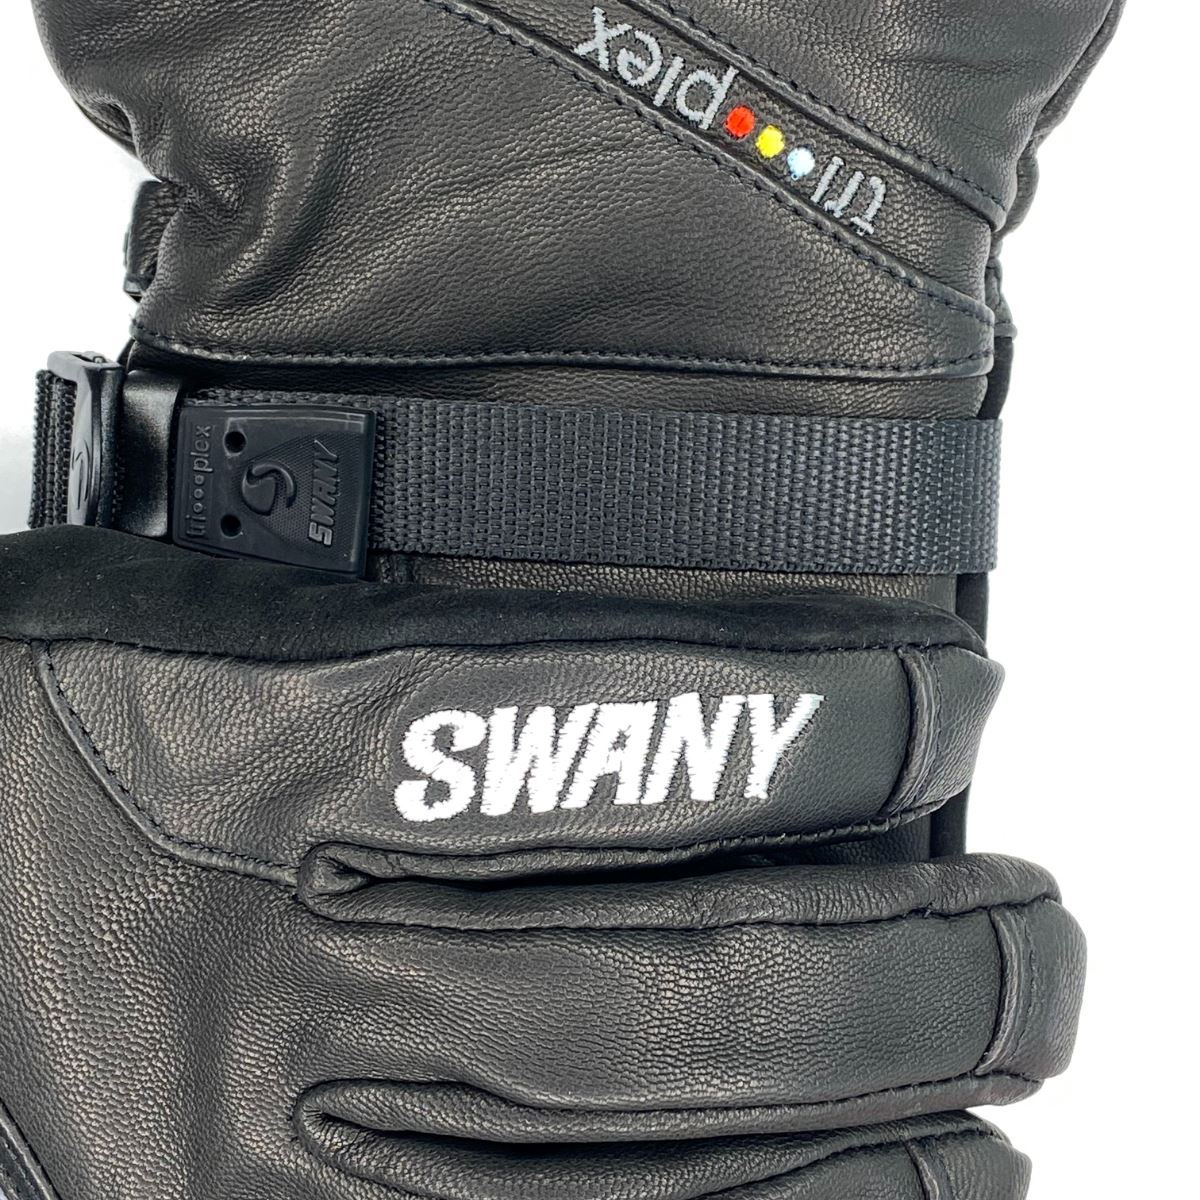 Womens Swany X-Cell 2 Waterproof Glove - Black Gloves Swany XL/8.0 